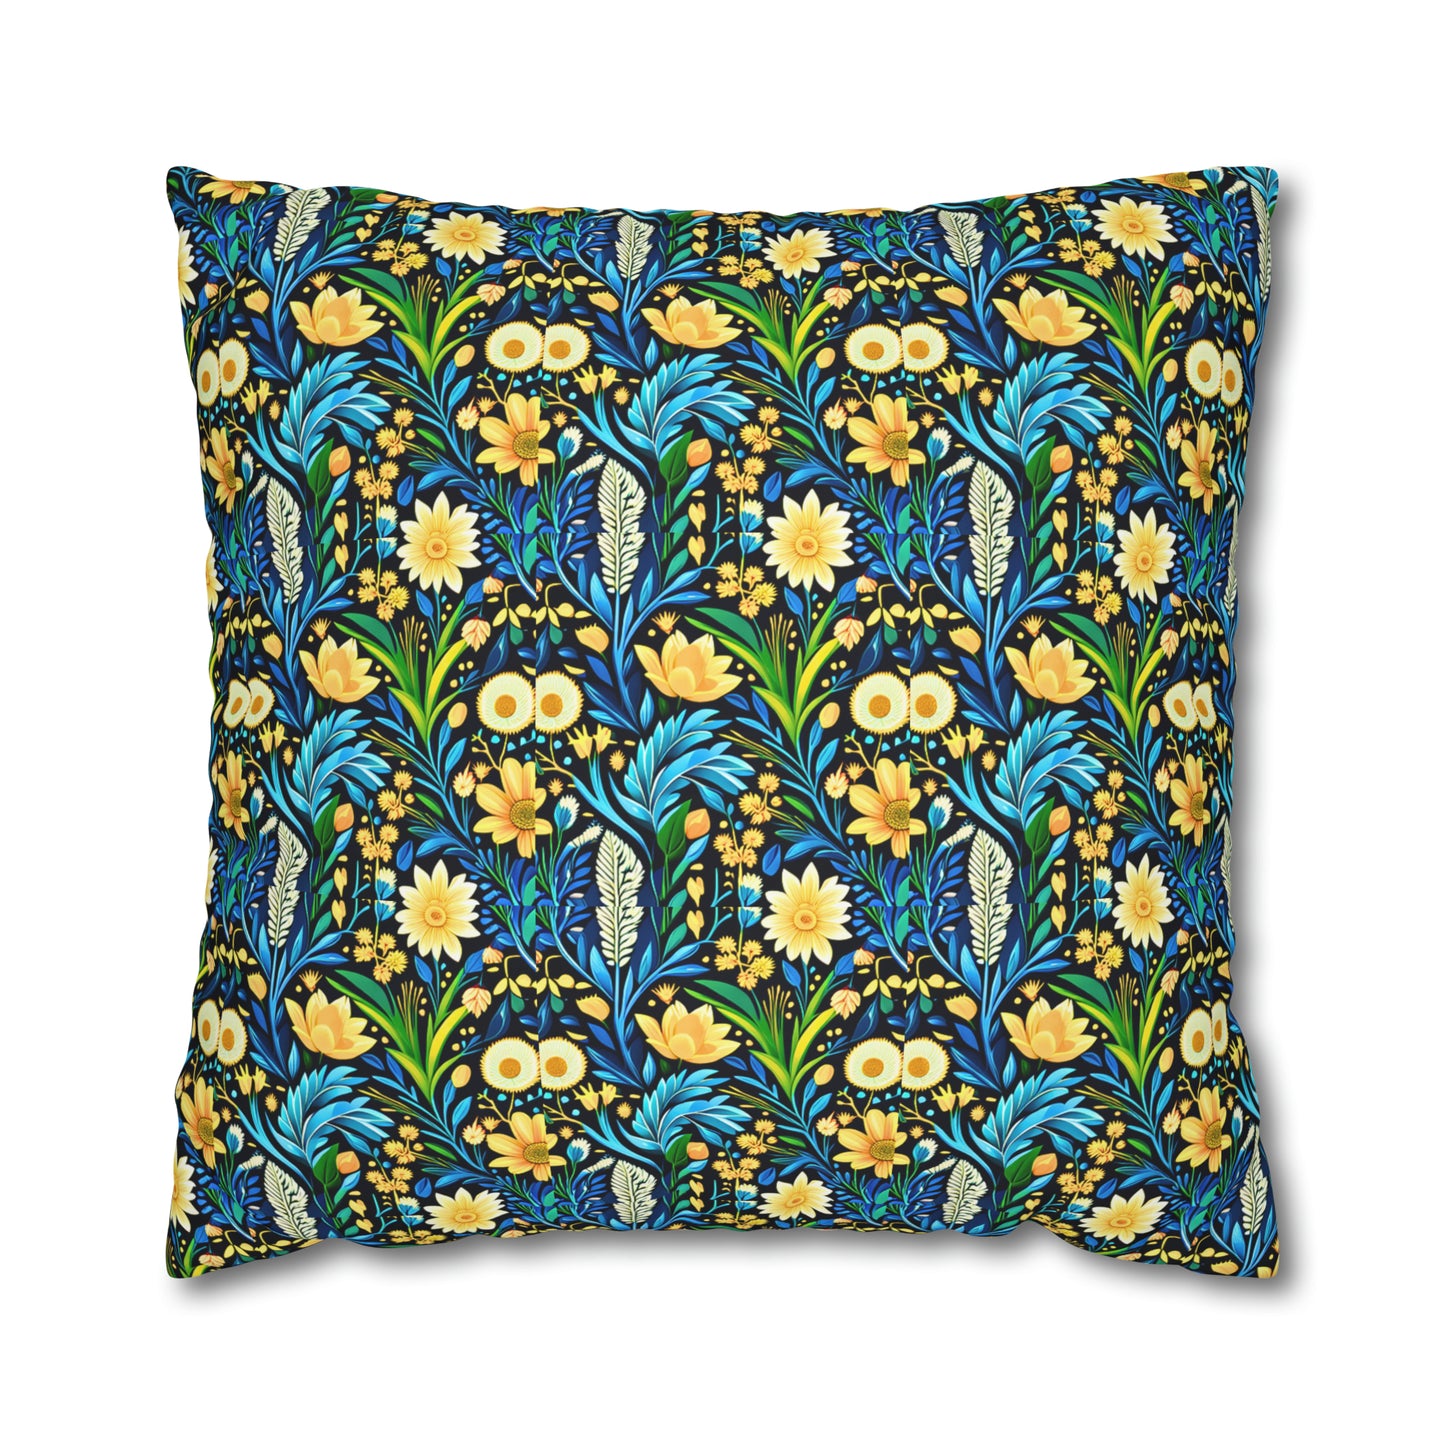 Hyde Park London Early English Daffodil Spring Flowers Decorative Accent Spun Polyester Pillow Cover